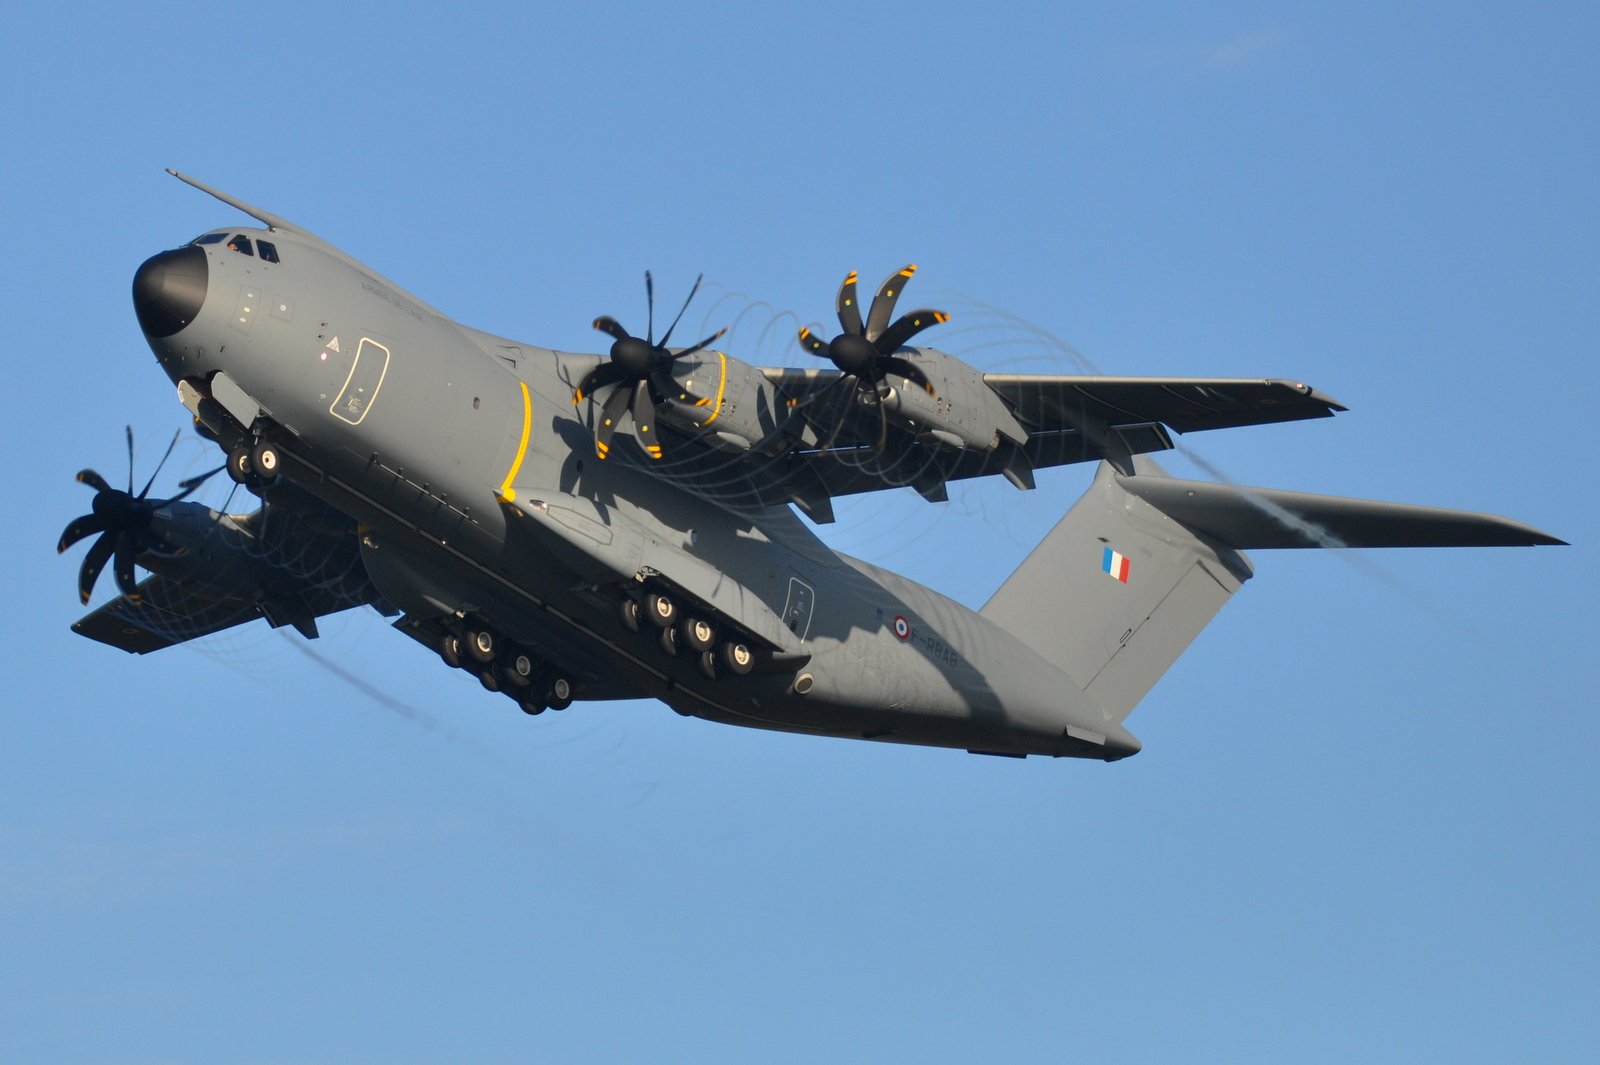 airbus, A400m, Atlas, 2013, Aircrafts, Transport, Military, Troups, Allemagne, France, Espagne, Royaume uni, Turquie, Belgique, Luxembourg, Malaisie, Europe Wallpaper